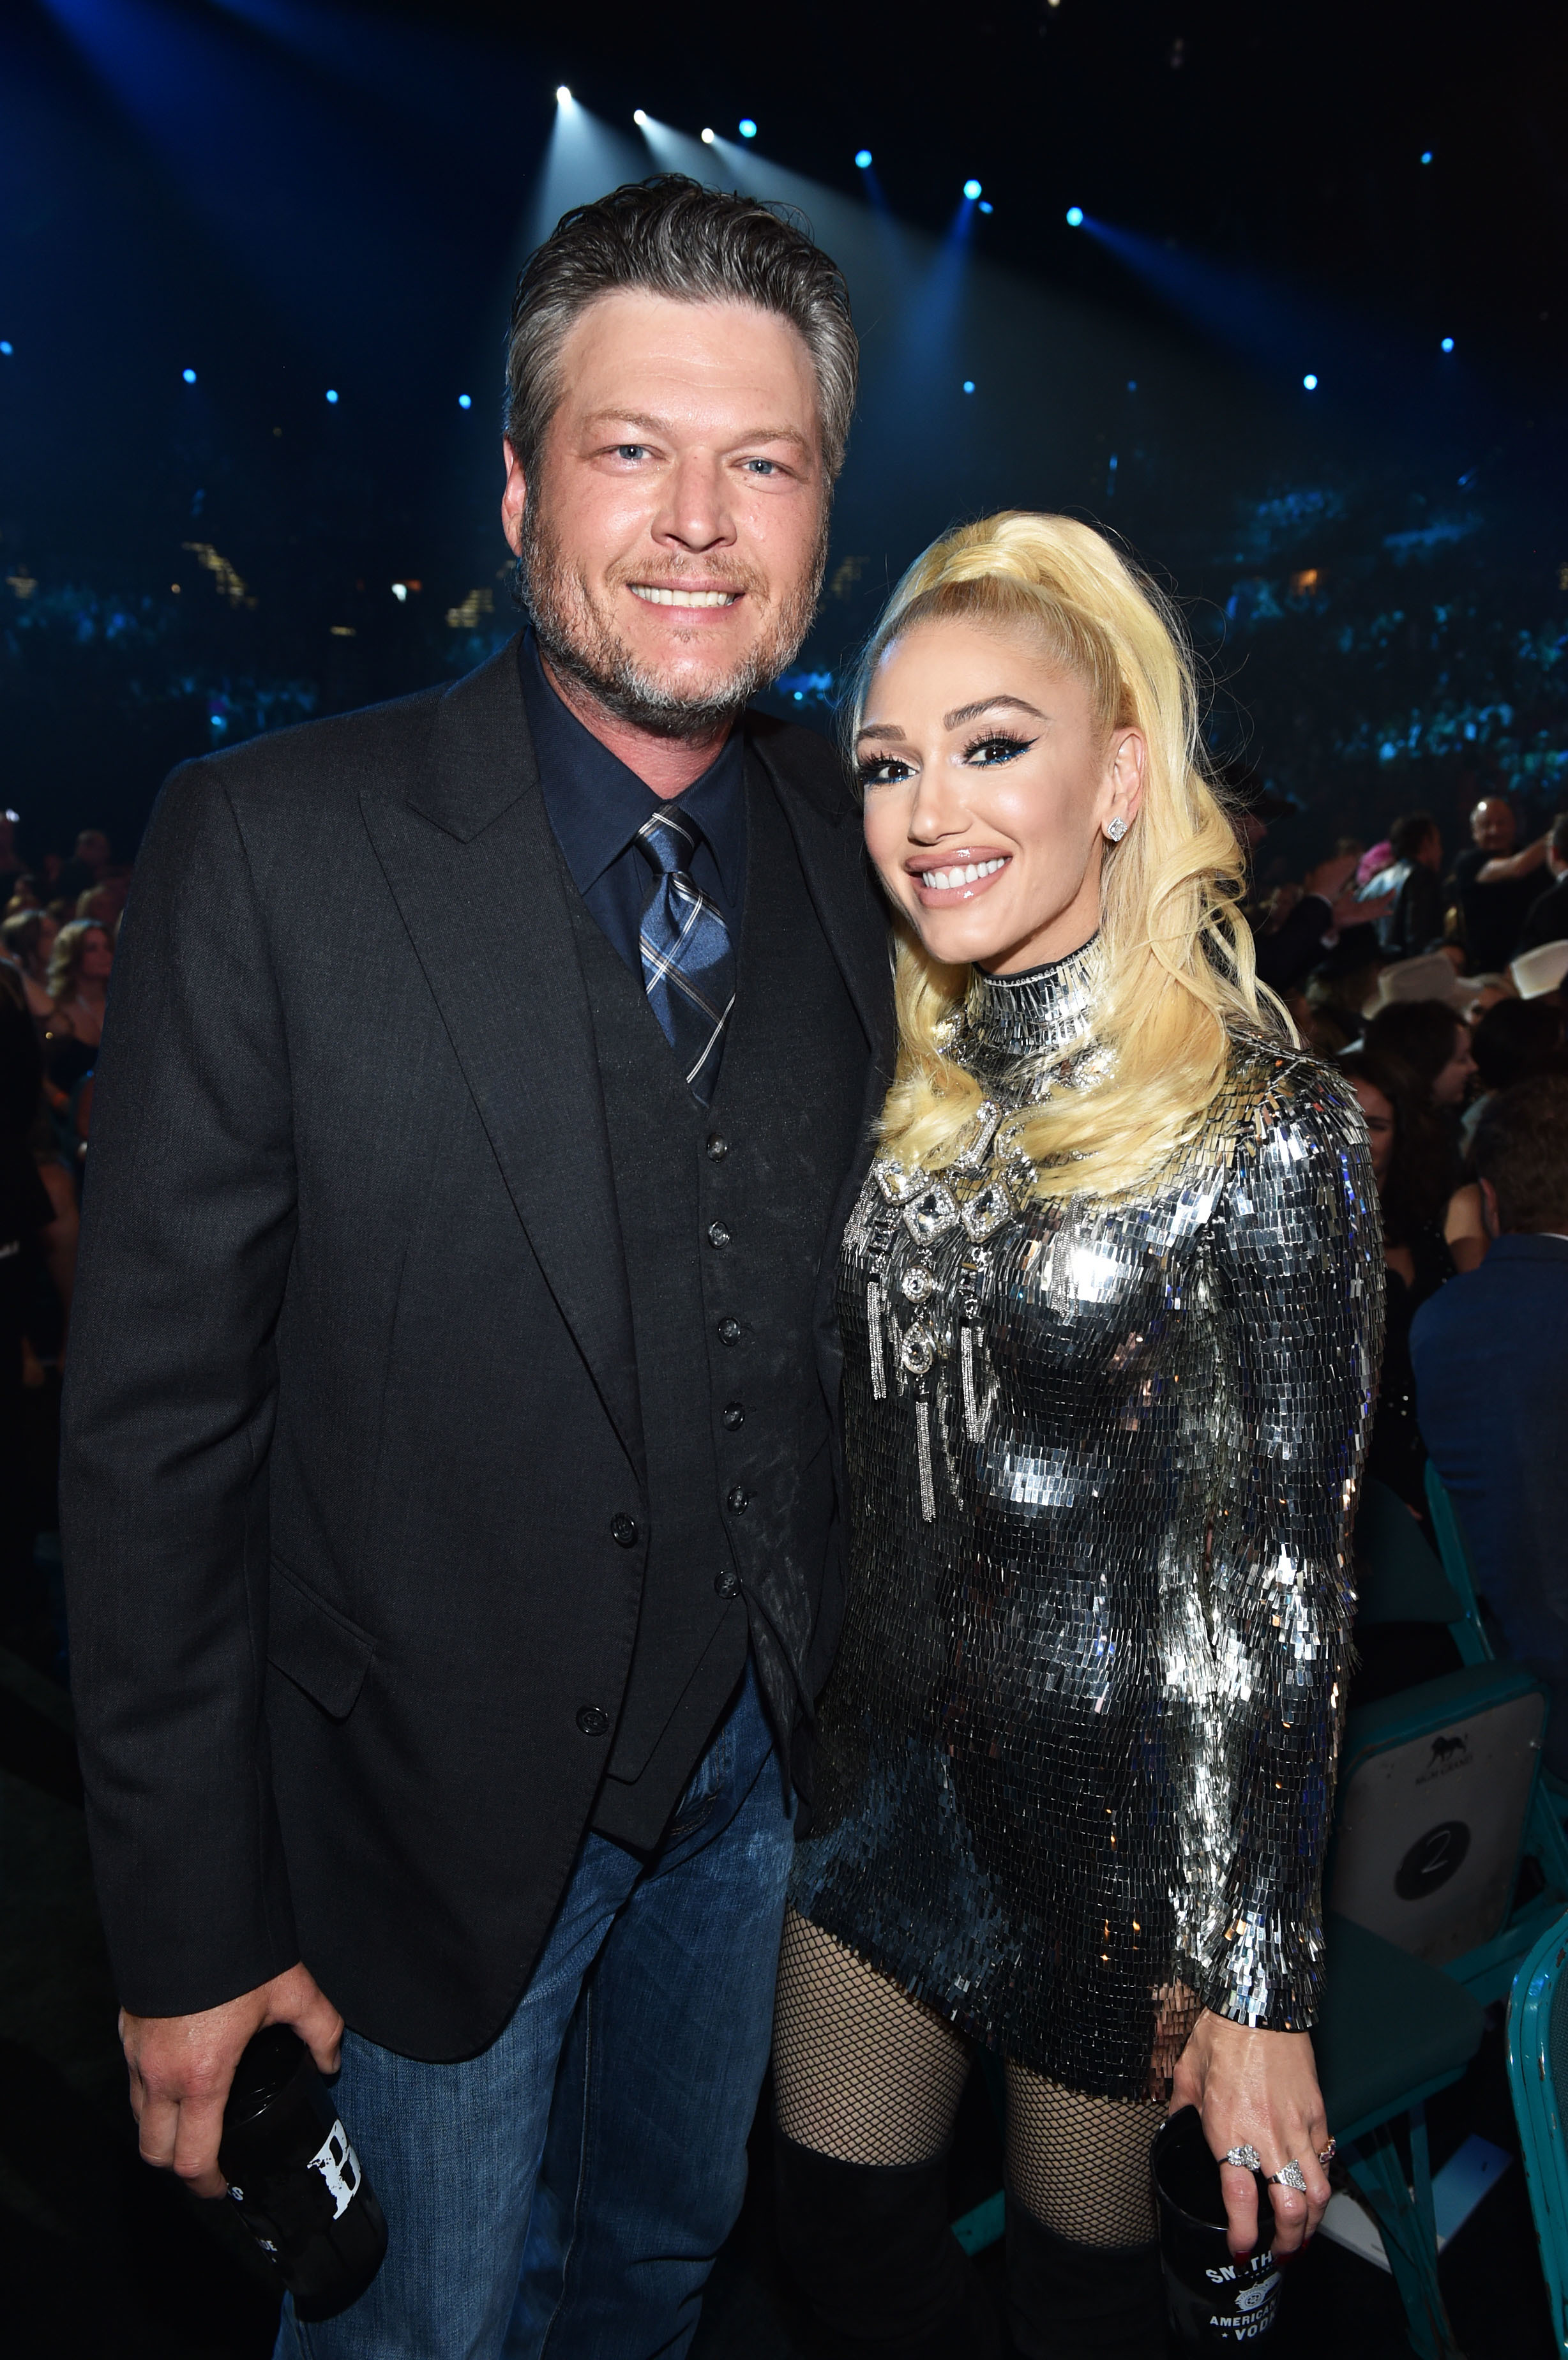 ACM Awards: Photos, Backstage Chatter From Country's Return to Vegas